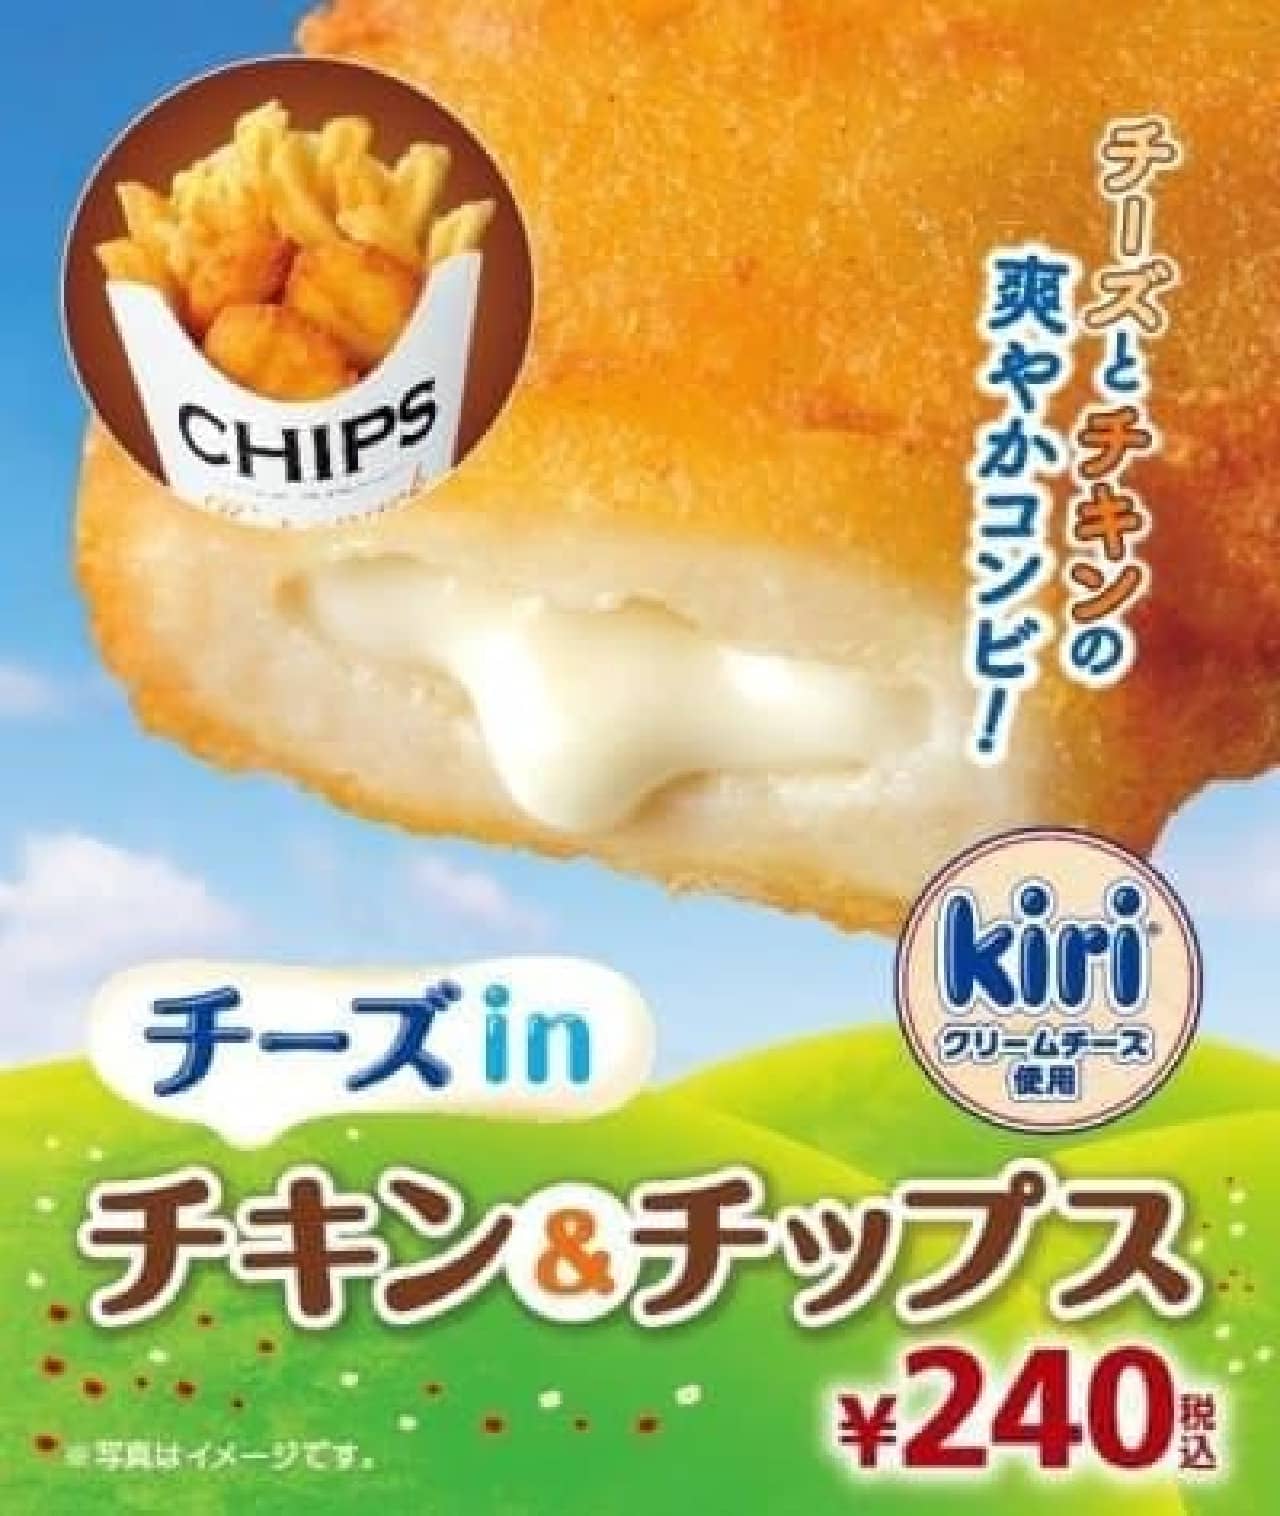 A new combination of popular snacks!